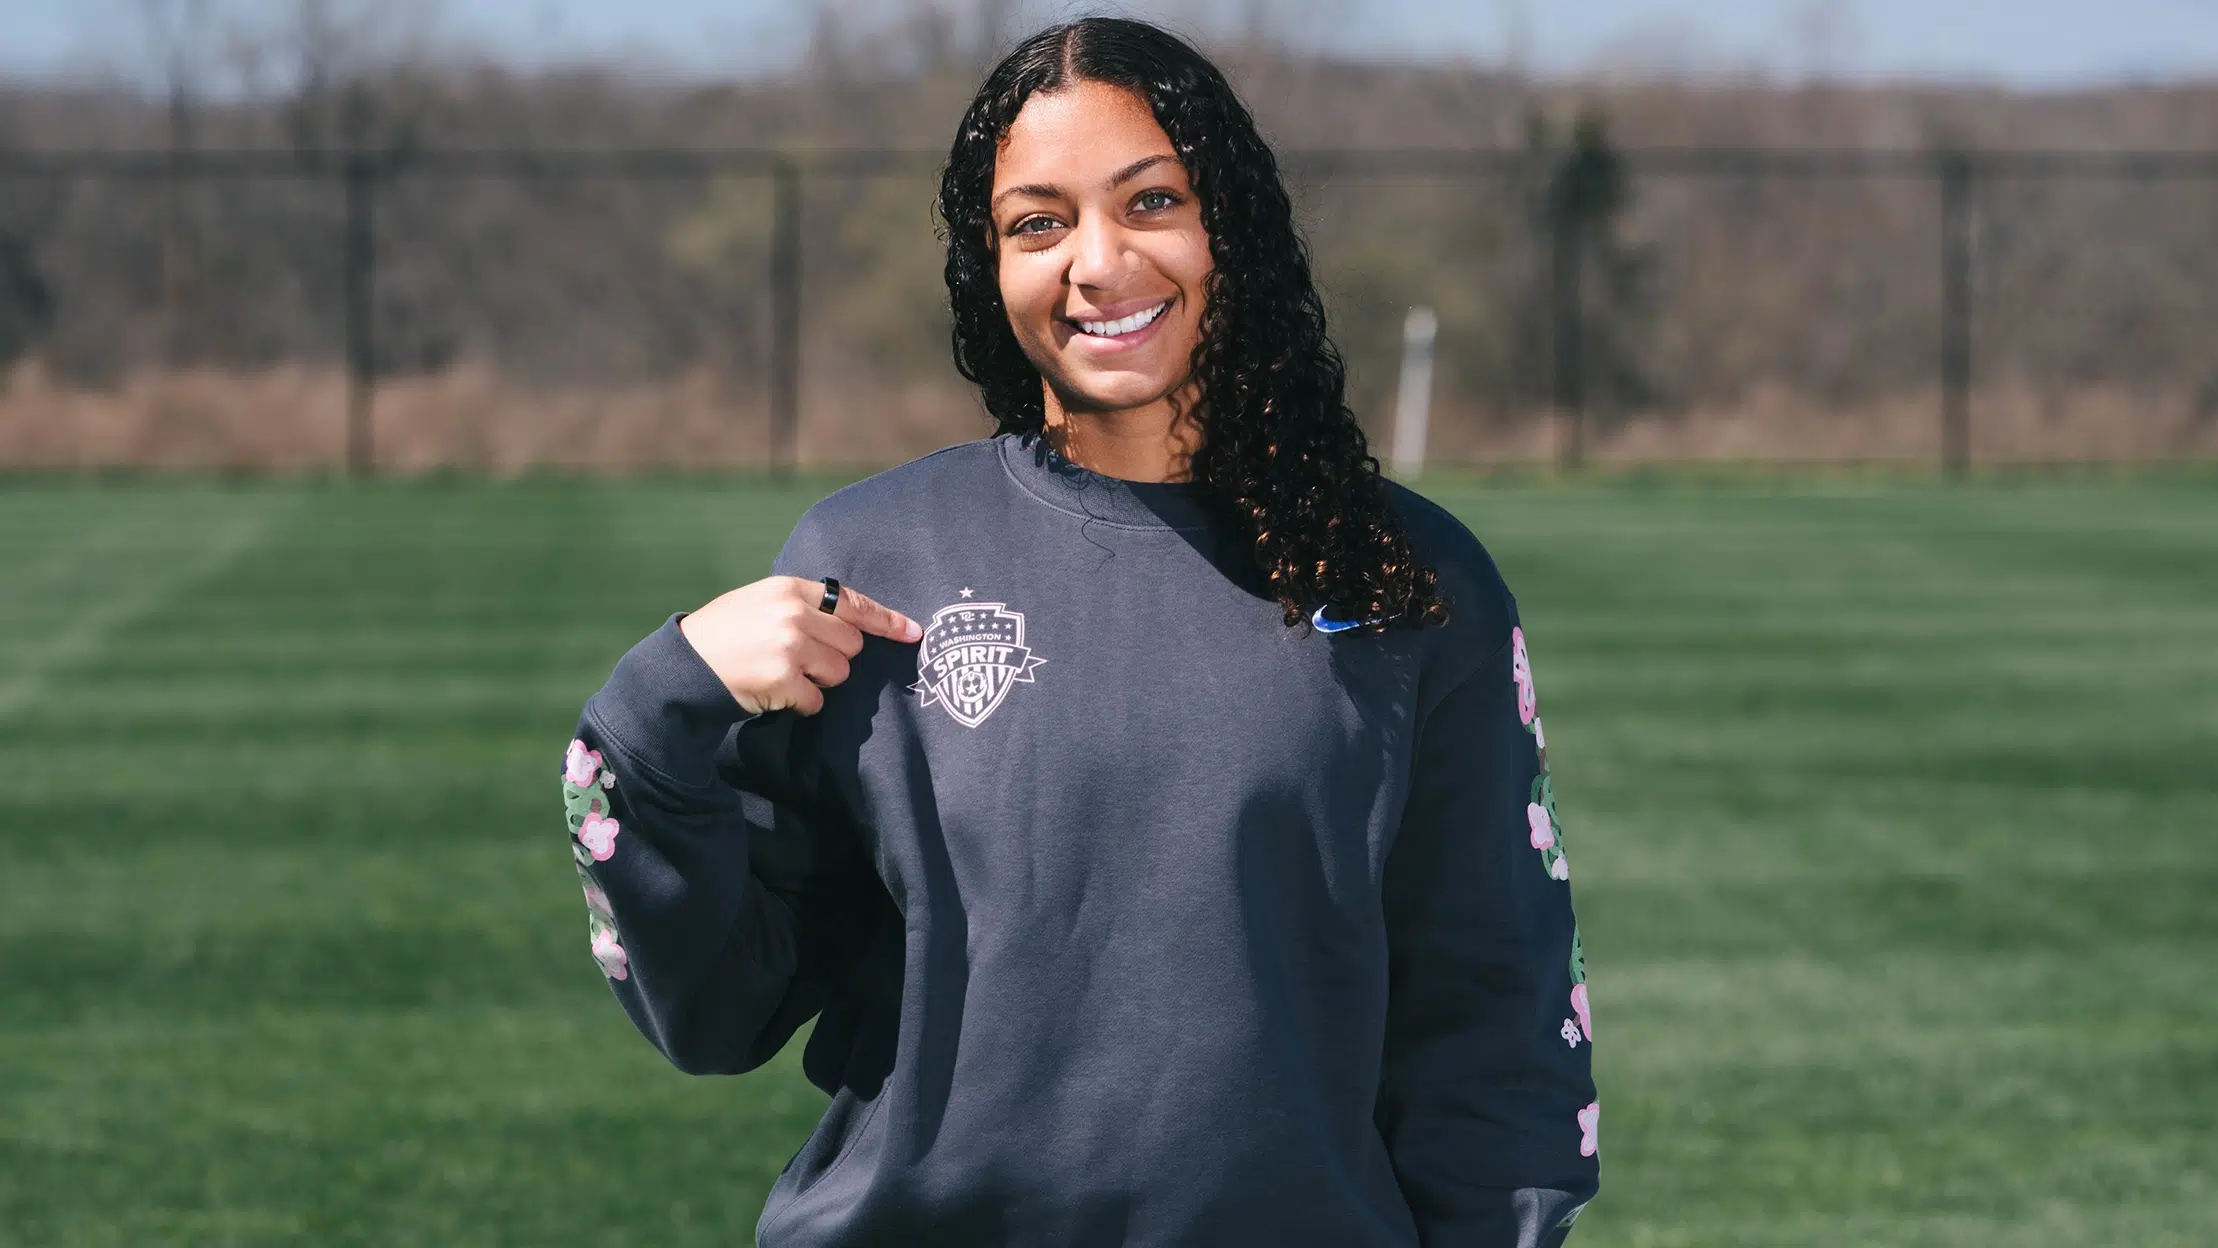 Mikaela Morris stands on a soccer field wearing a dark gray crewneck sweatshirt. She's pointing to the pink Washington Spirit crest on her chest.